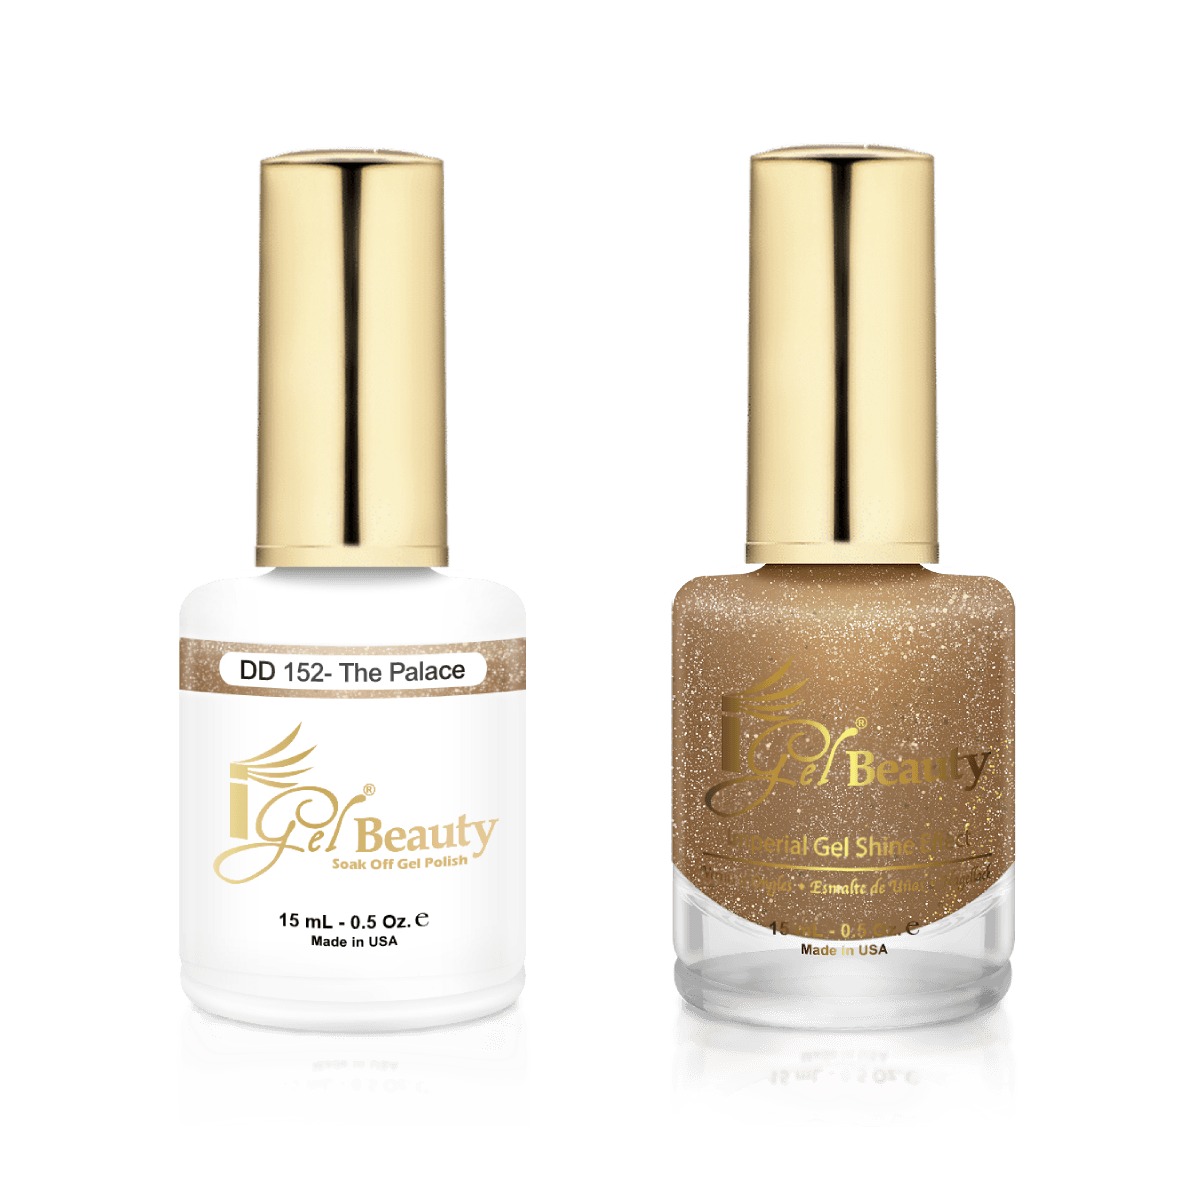 IGel Duo Gel Polish + Matching Nail Lacquer DD 152 THE PALACE